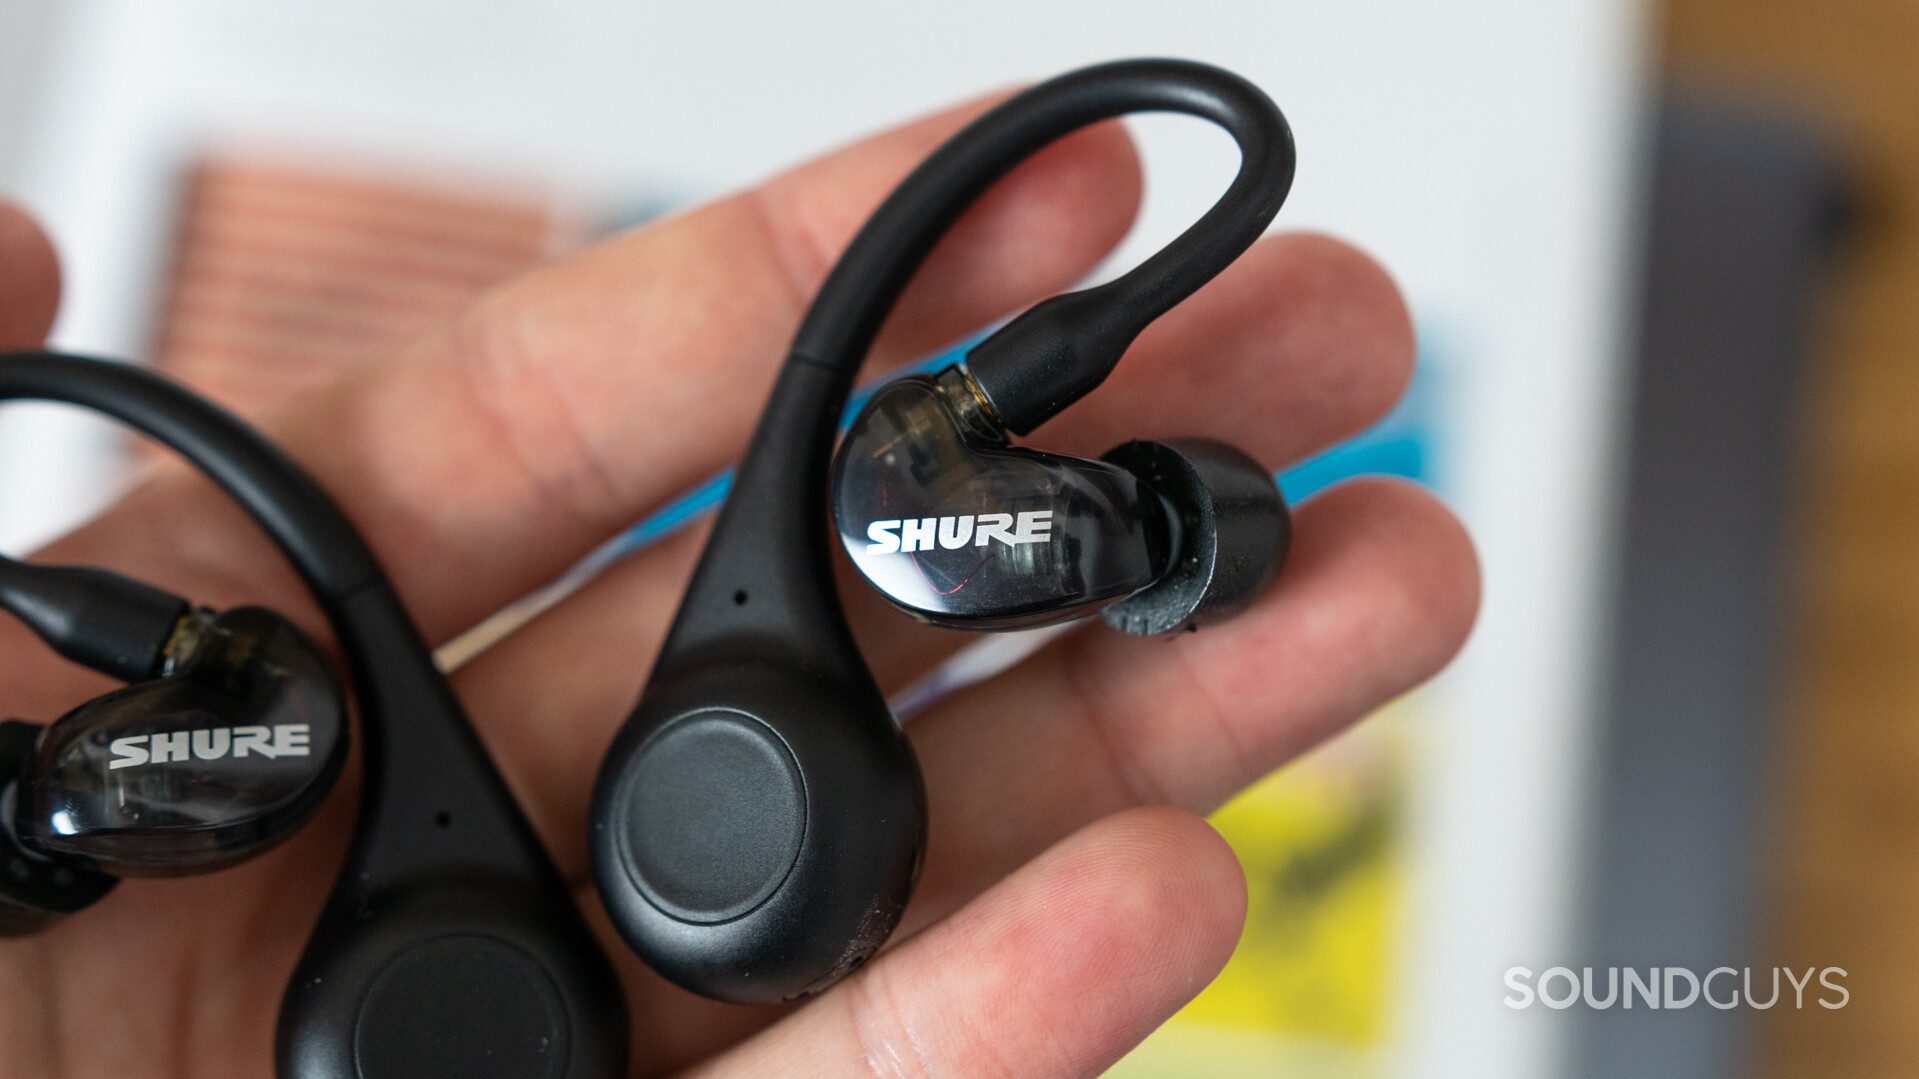 A man holds the Shure Aonic 215 true wireless earbuds and adapters.